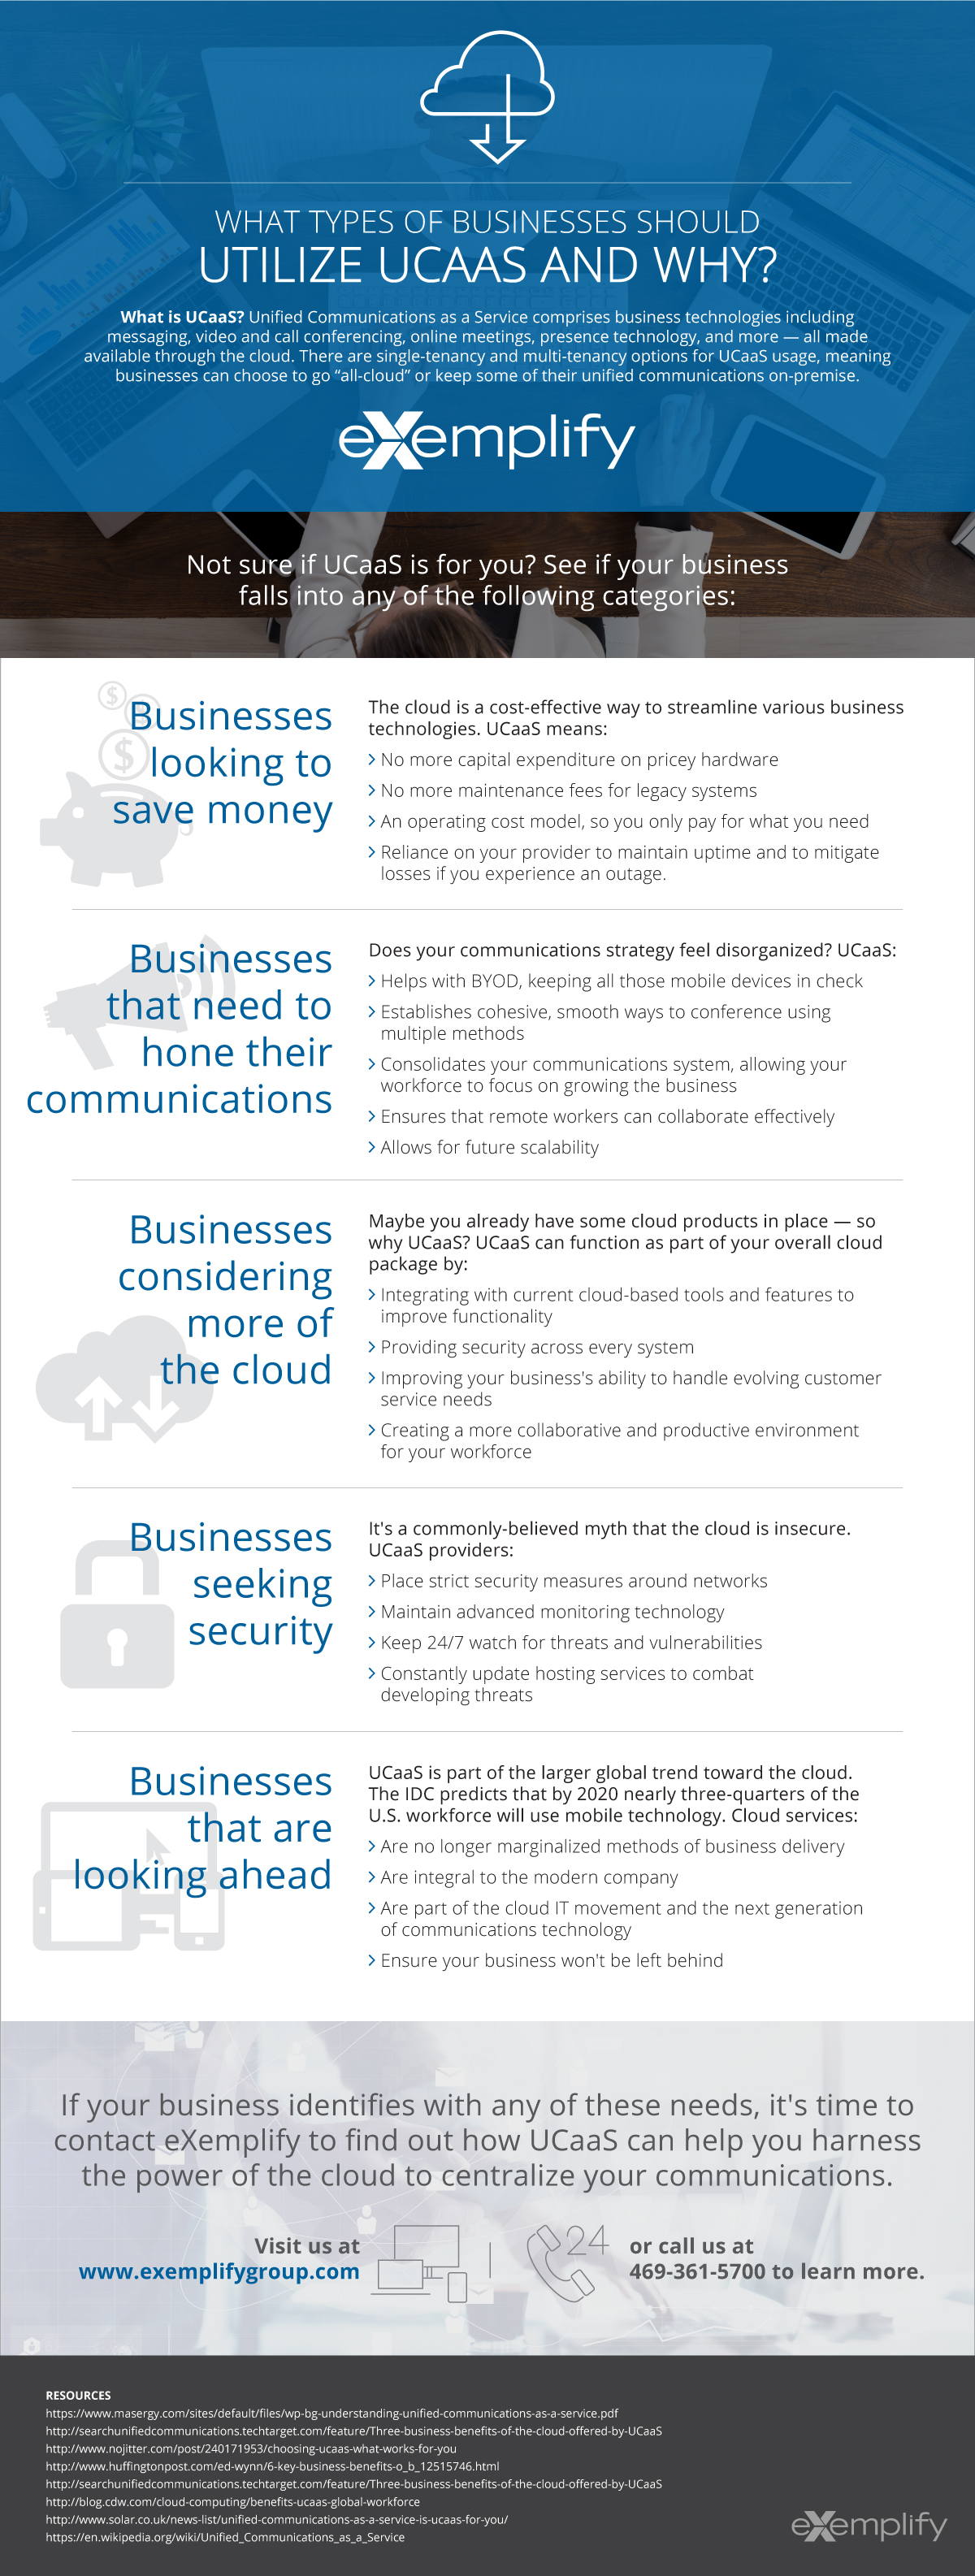 Find out what kinds of businesses would benefit from UCaaS.